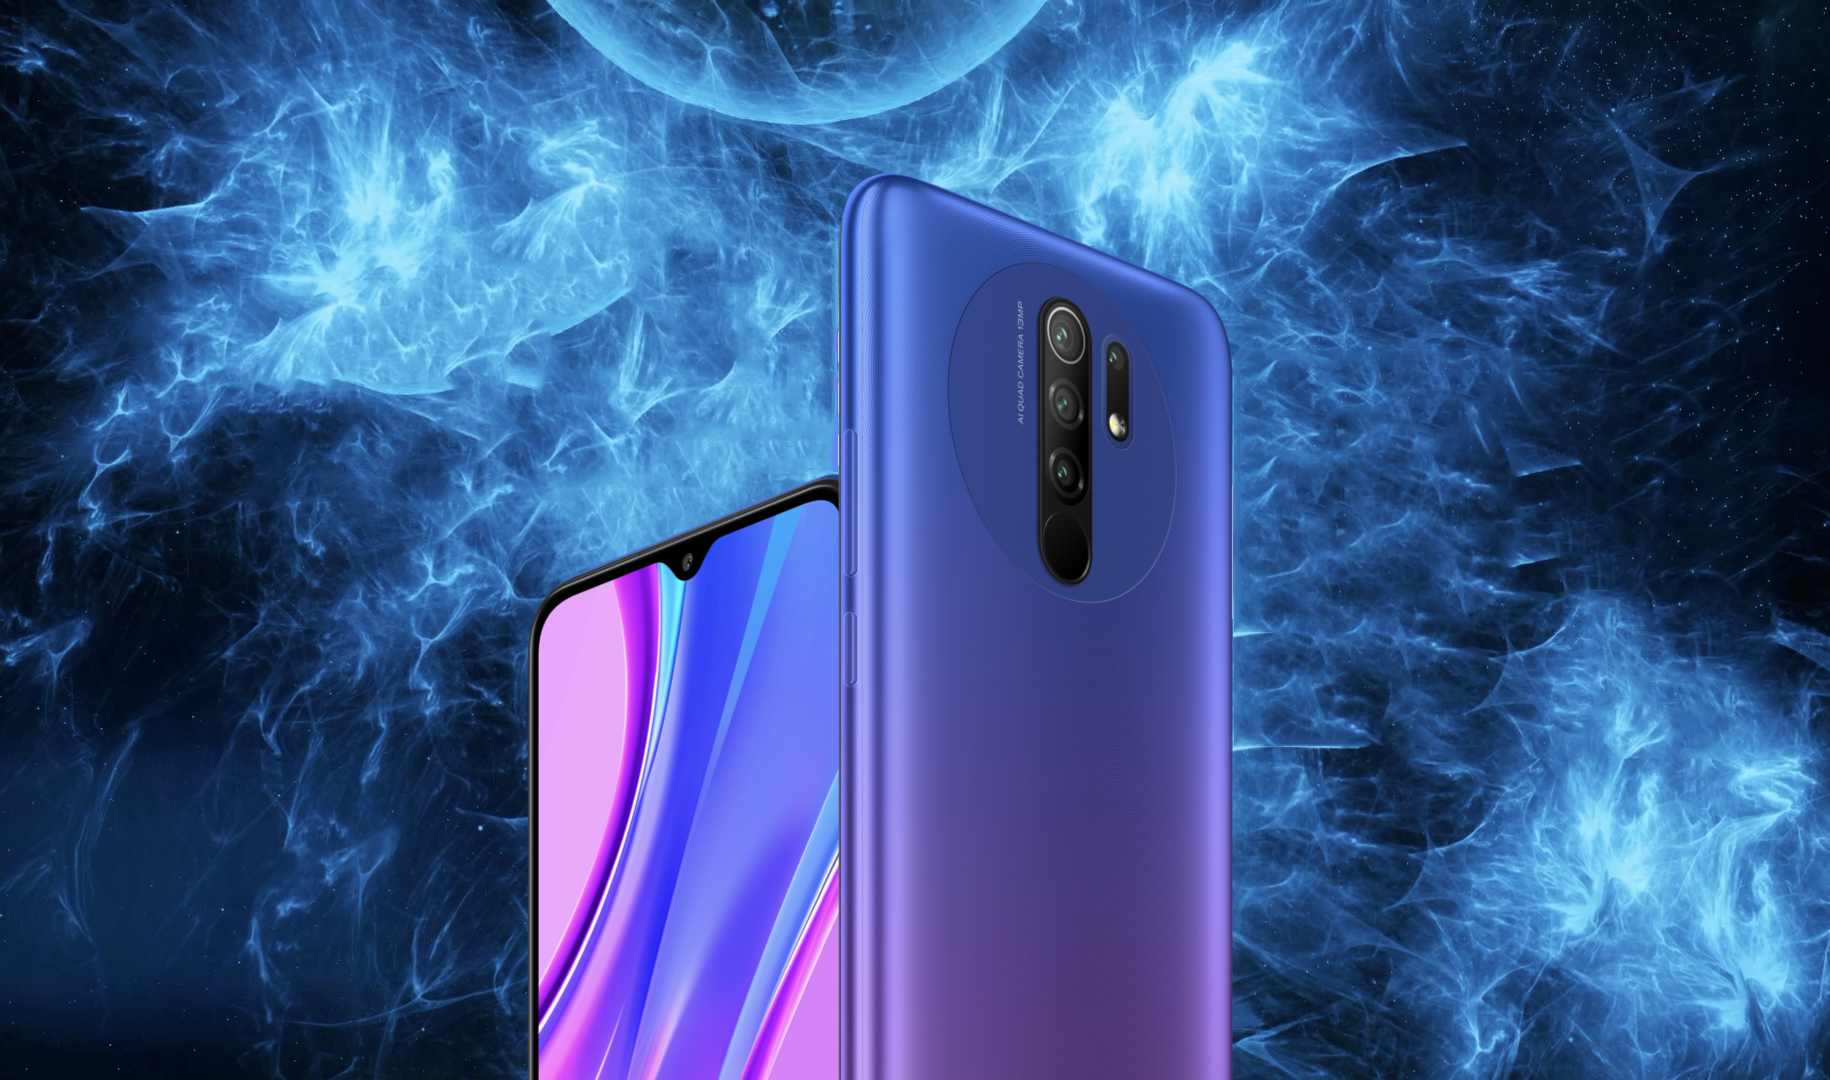 xiaomi redmi 9 receives android 11 update with may security patch